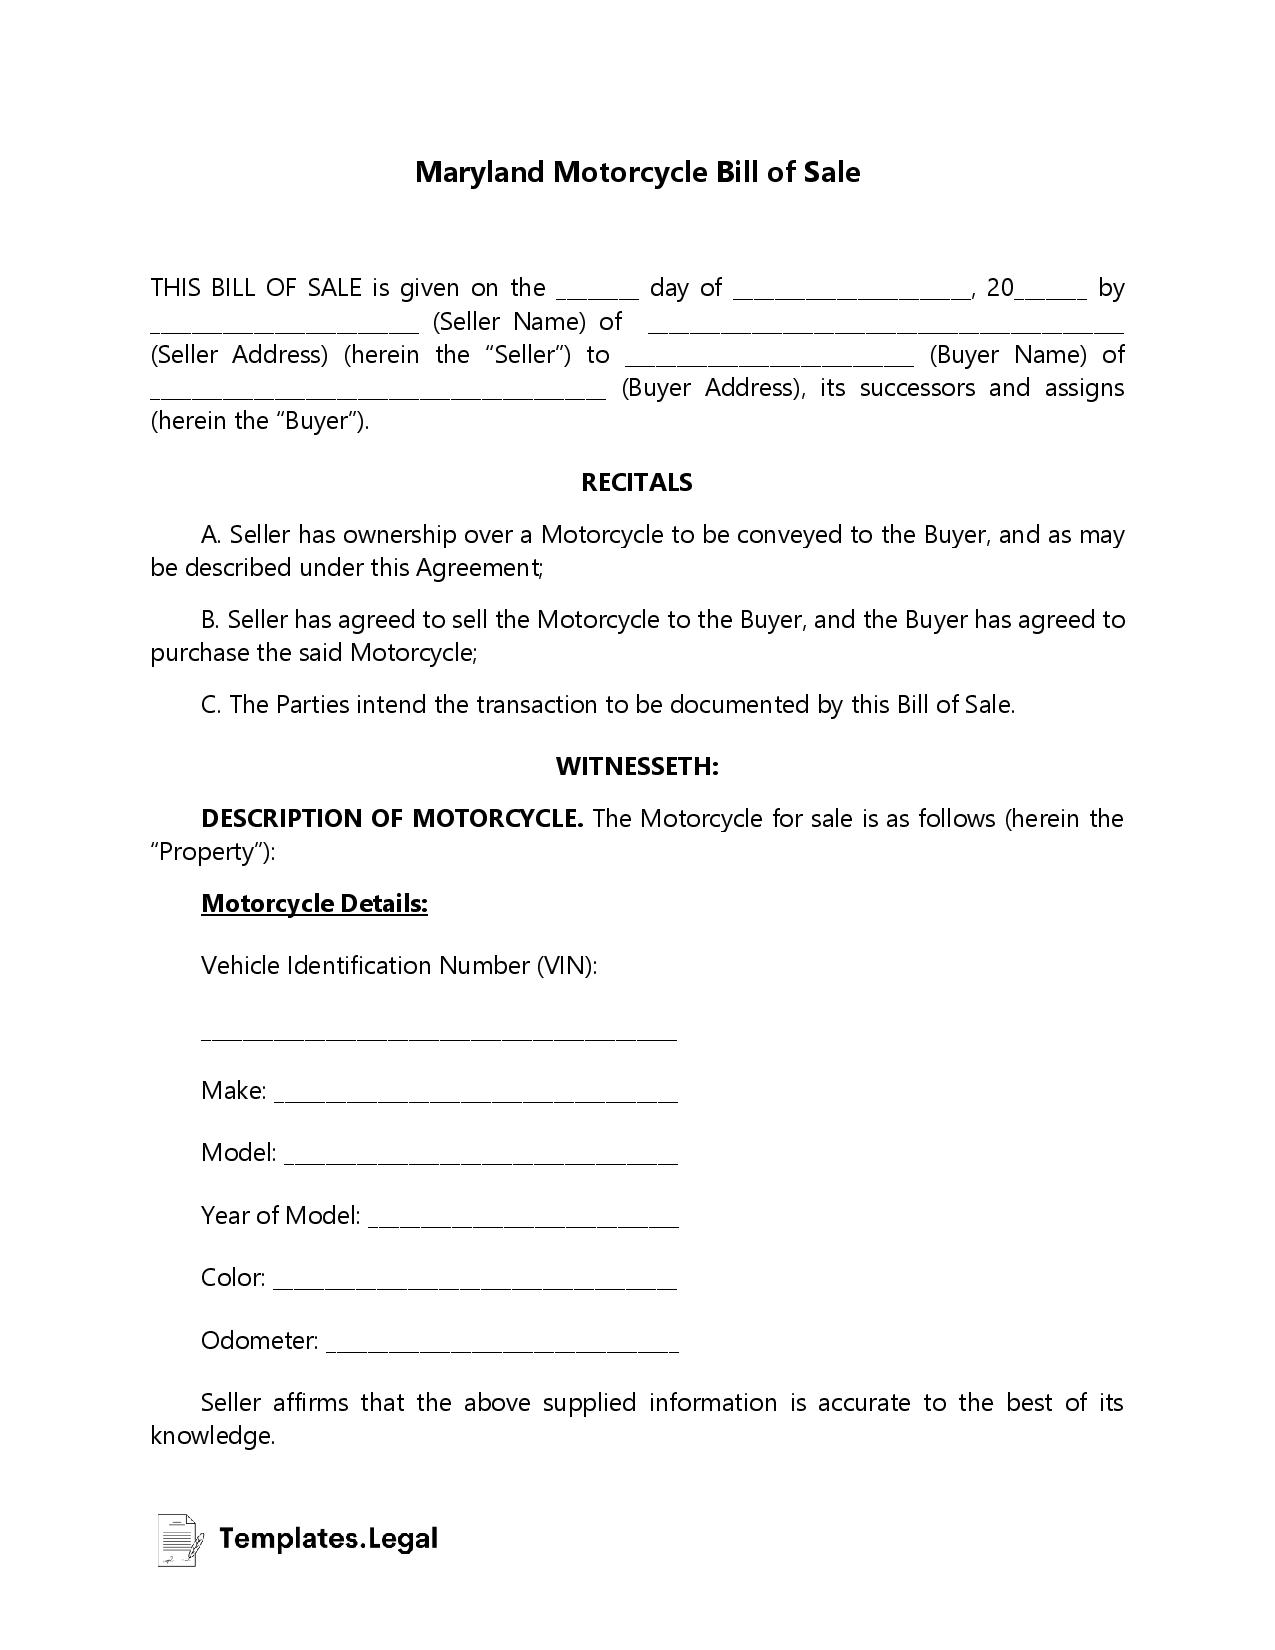 Maryland Motorcycle Bill of Sale - Templates.Legal